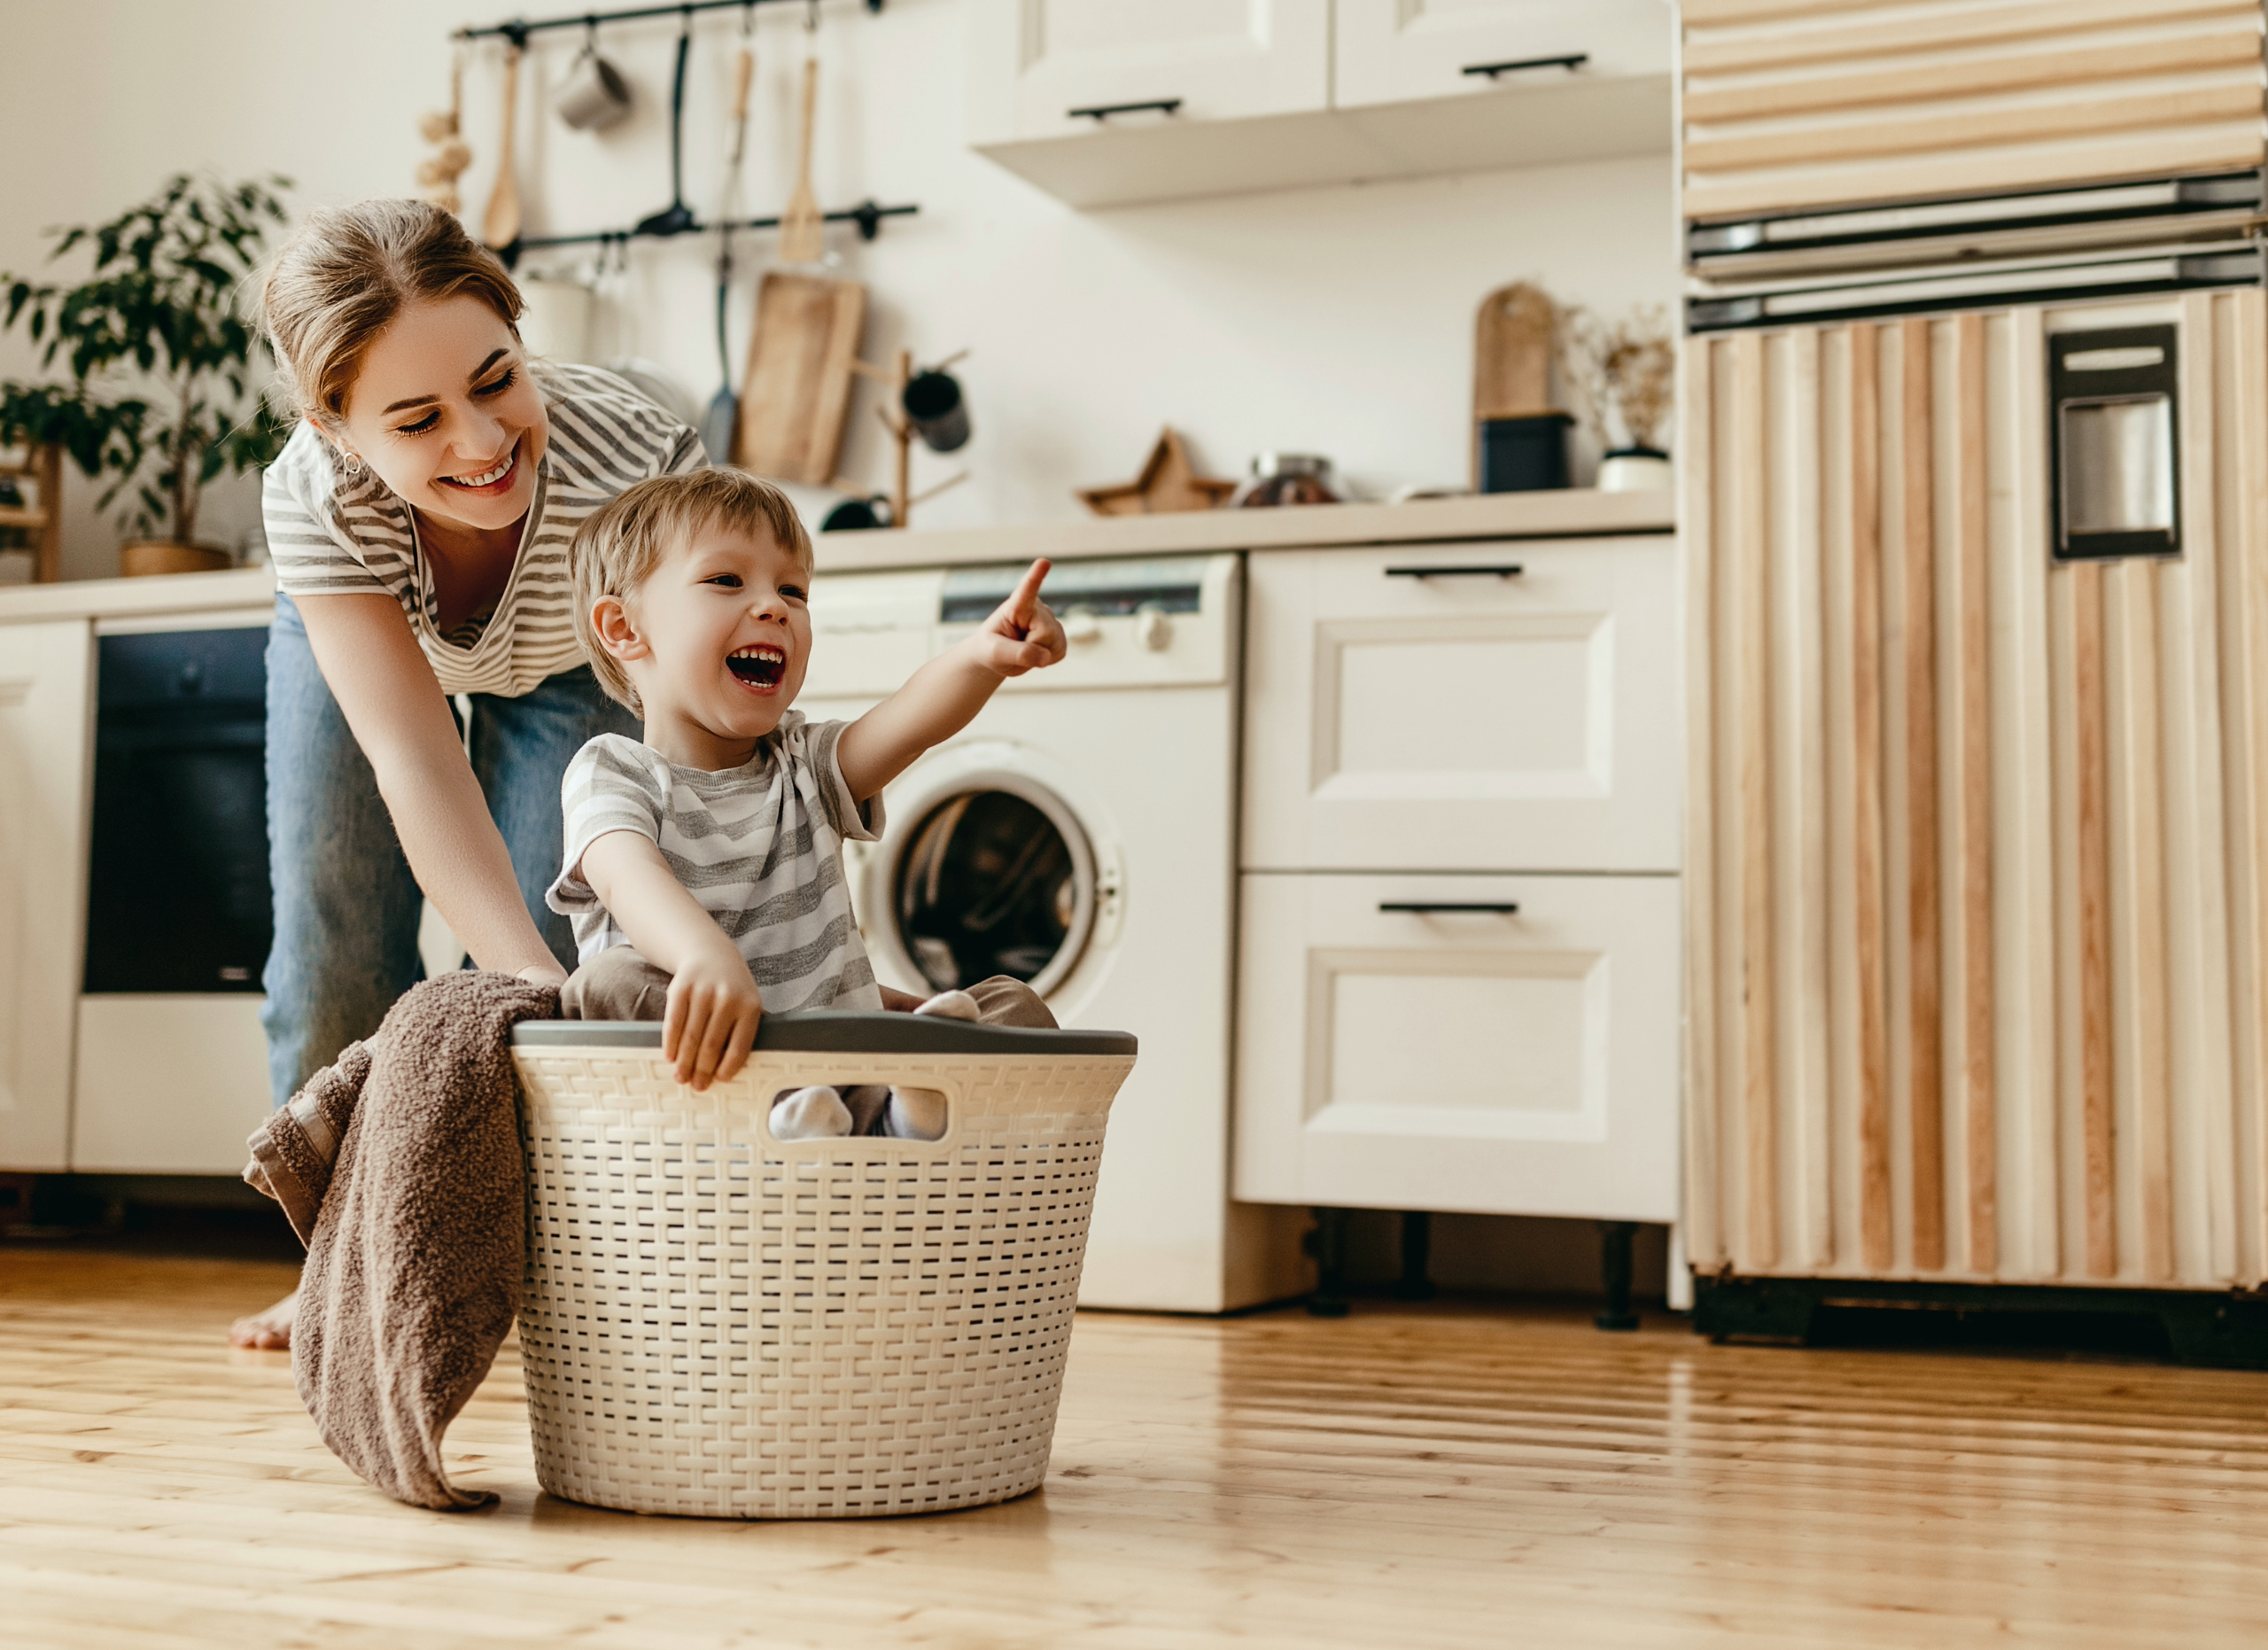 Parenting On the Fly: Ways to Streamline Your Everyday